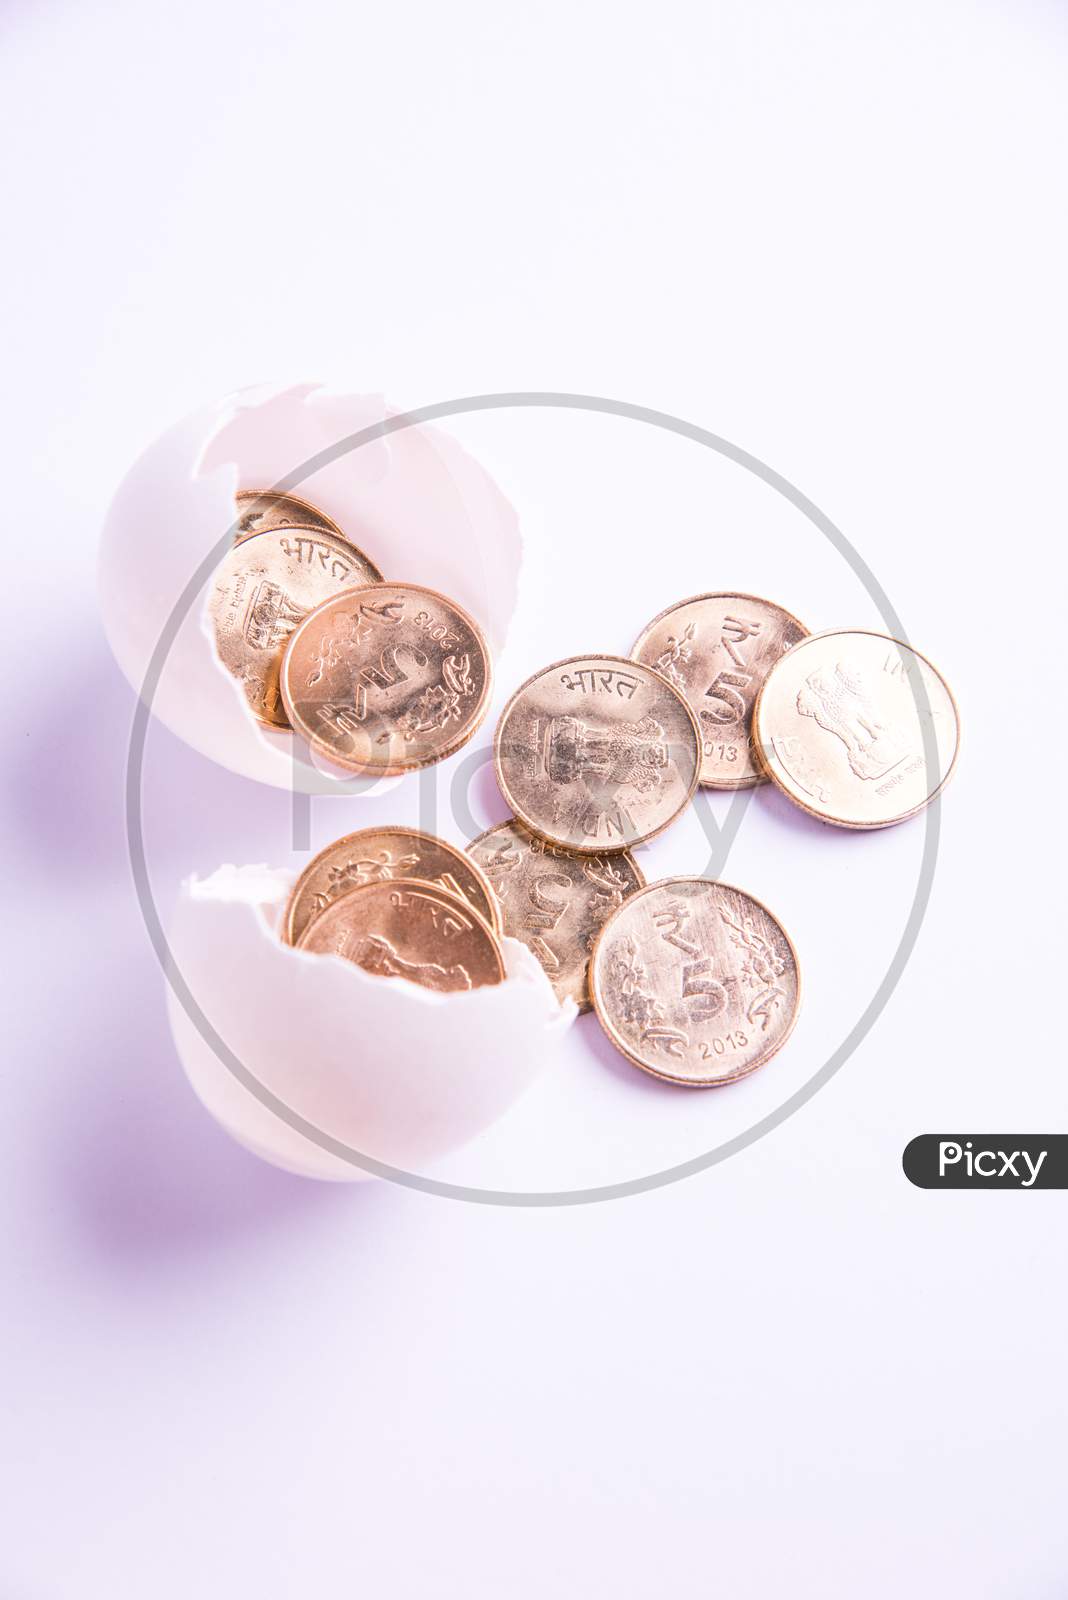 indian five rupee golden coins emerging from cracked egg, isolated over white background